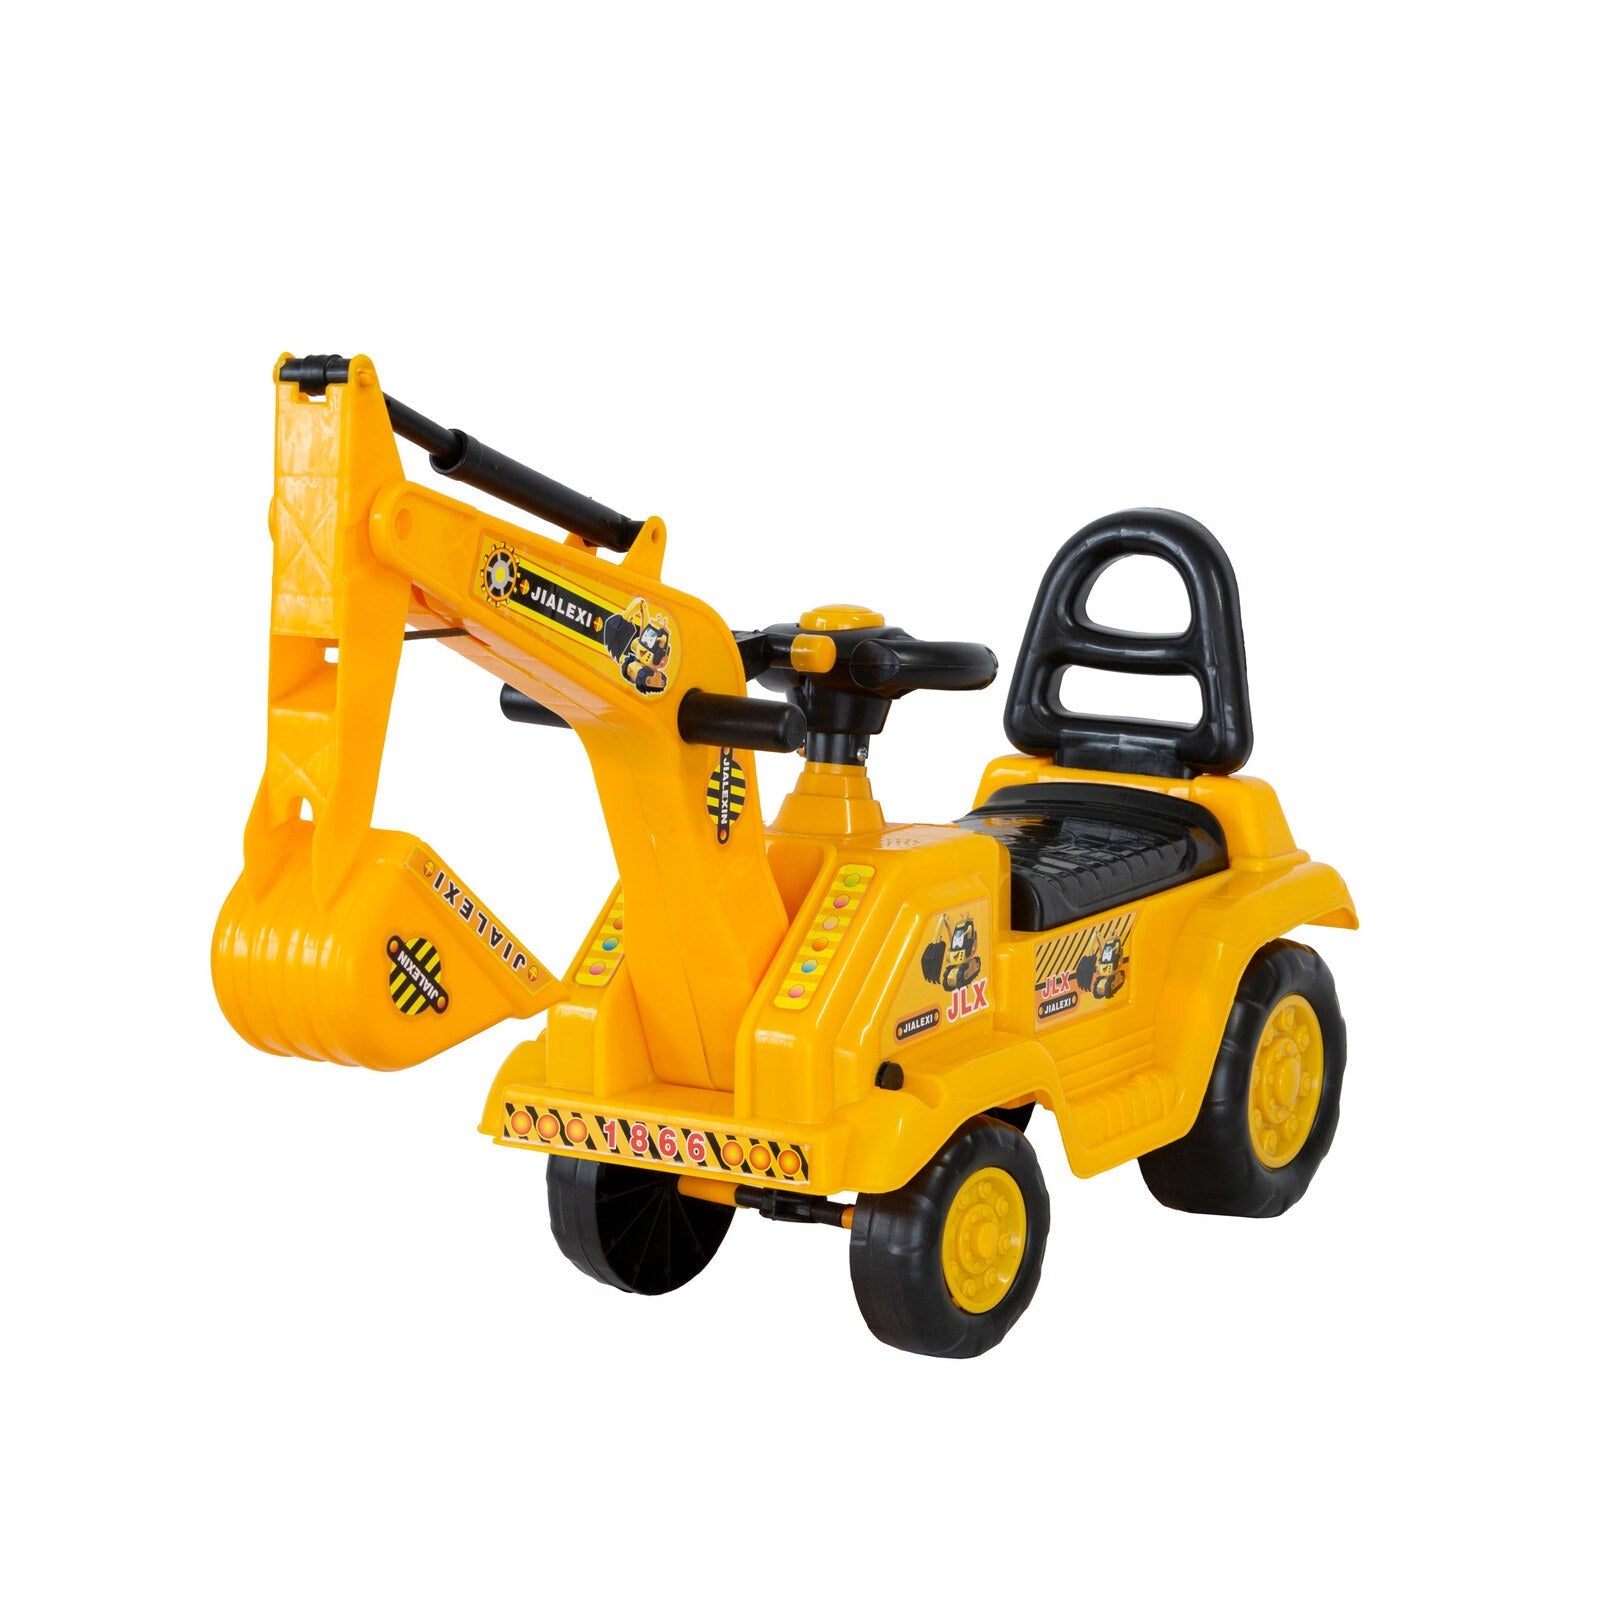 Ride-on Excavator Toy for Kids